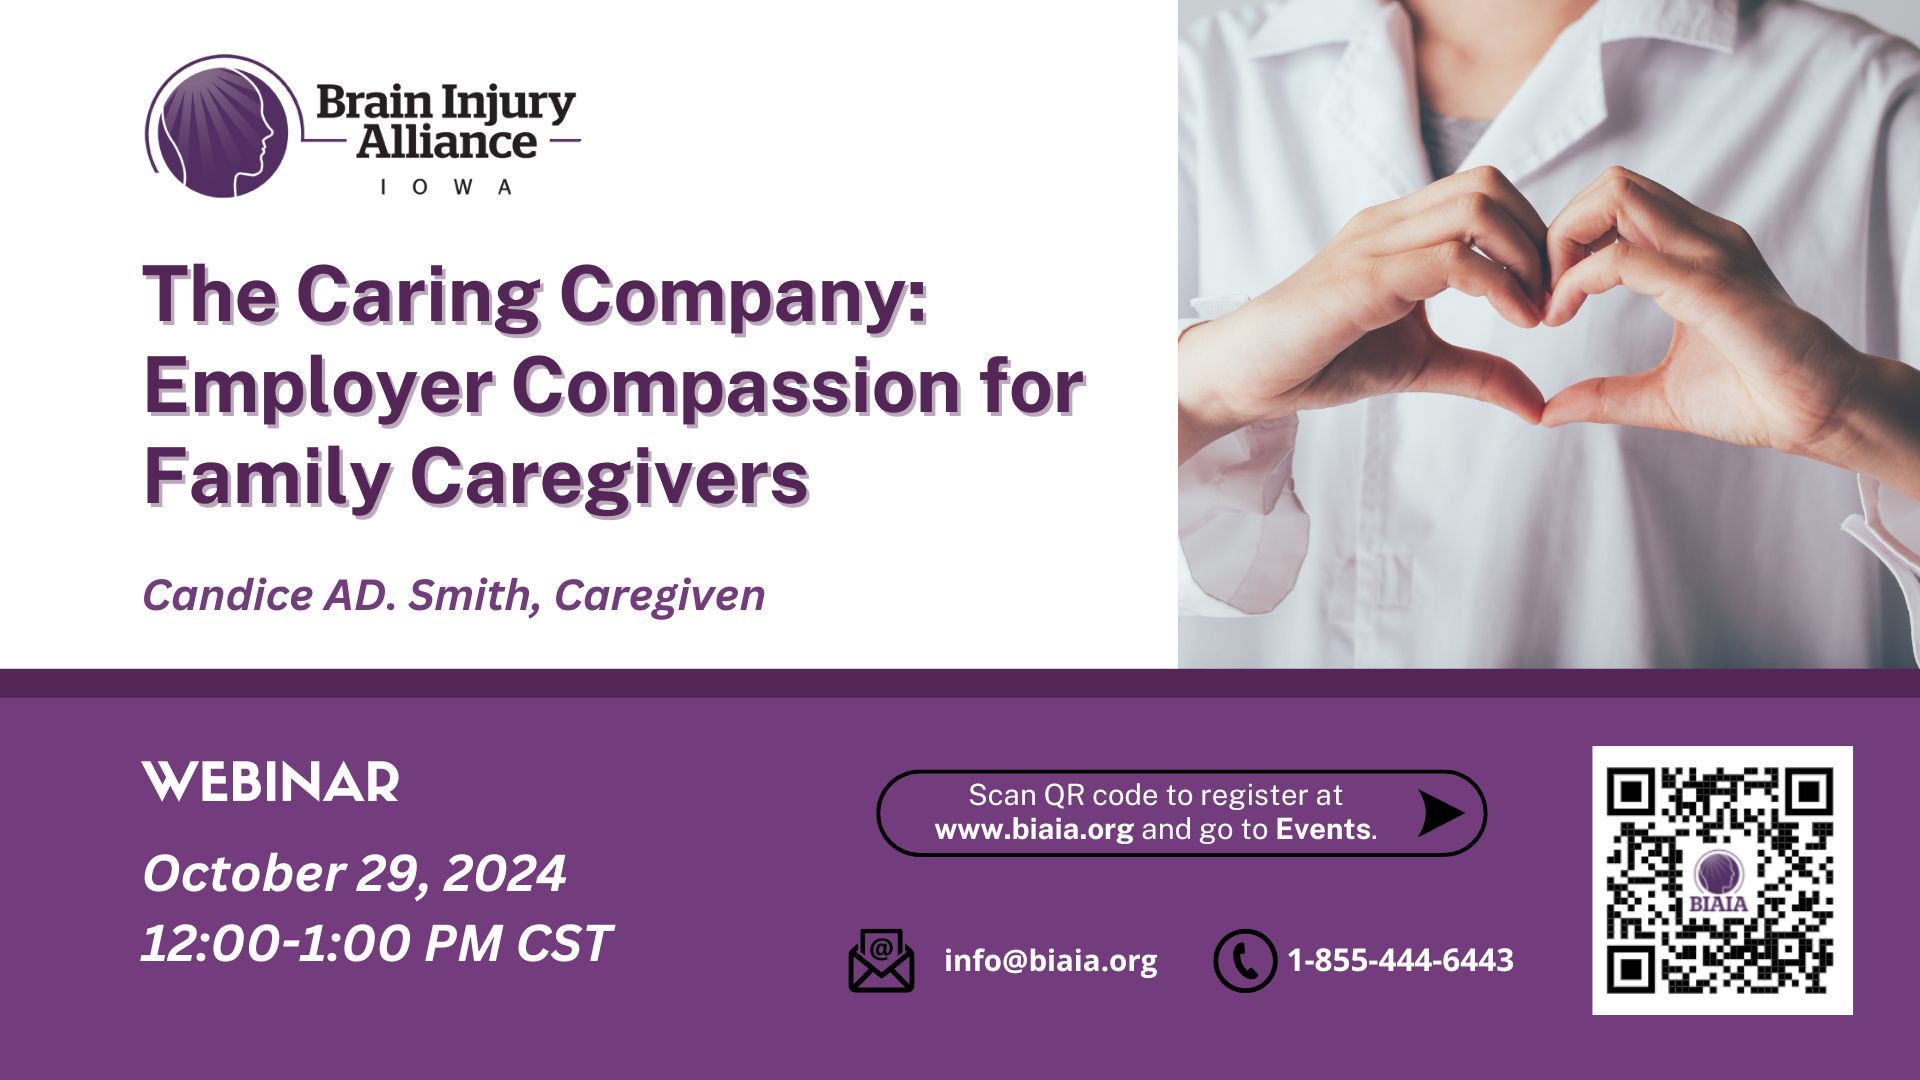 The Caring Company: Employer Compassion for Family Caregivers